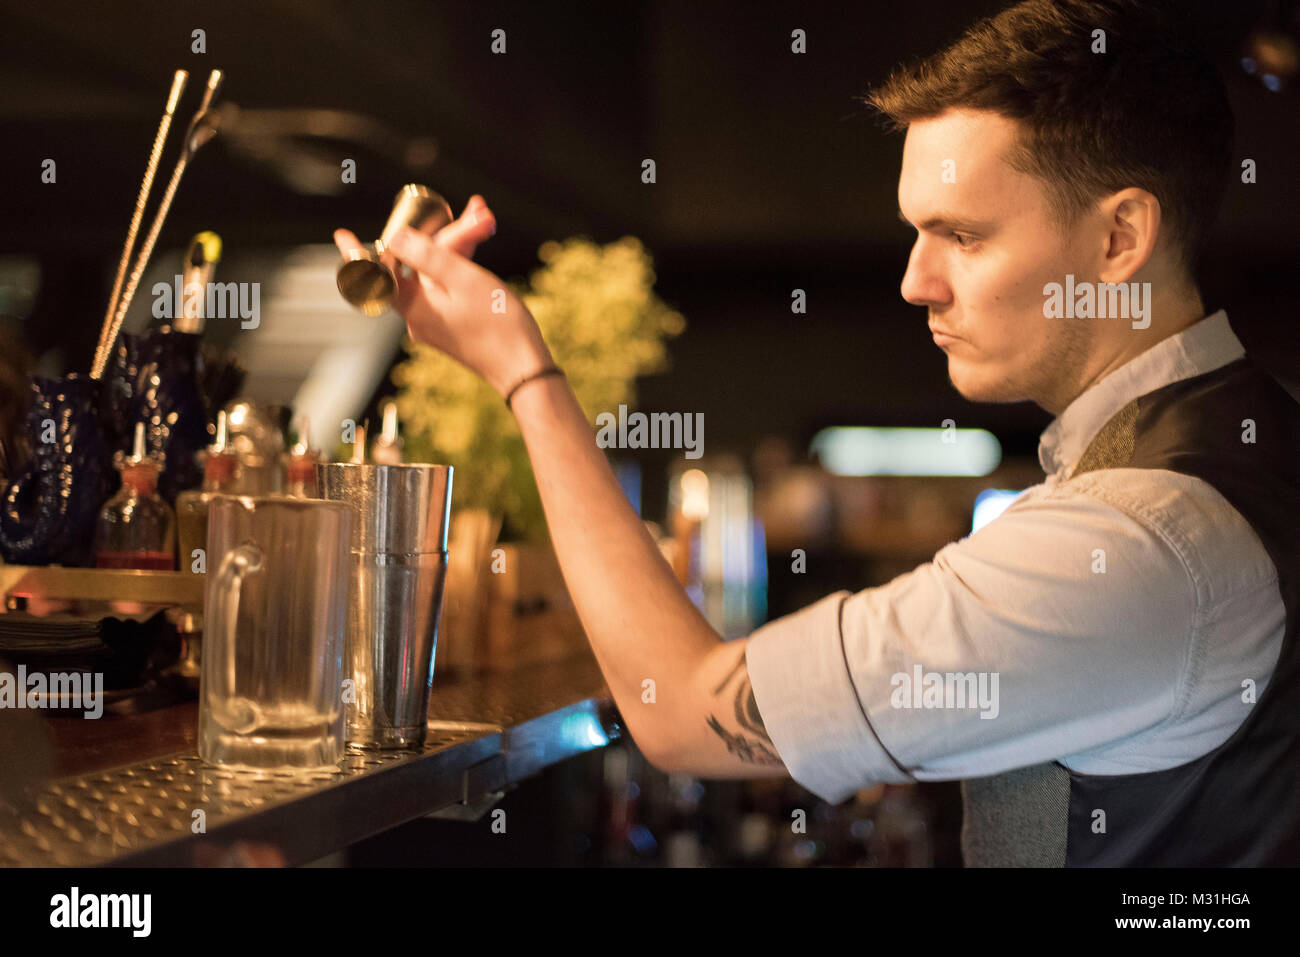 CARDIFF, UK. 24 January 2018. Matthew Jones, aged 28 from Llantrisant mixing a cocktail at the Dead Canary speakeasy in Cardiff. Modelled with a 1920s Stock Photo